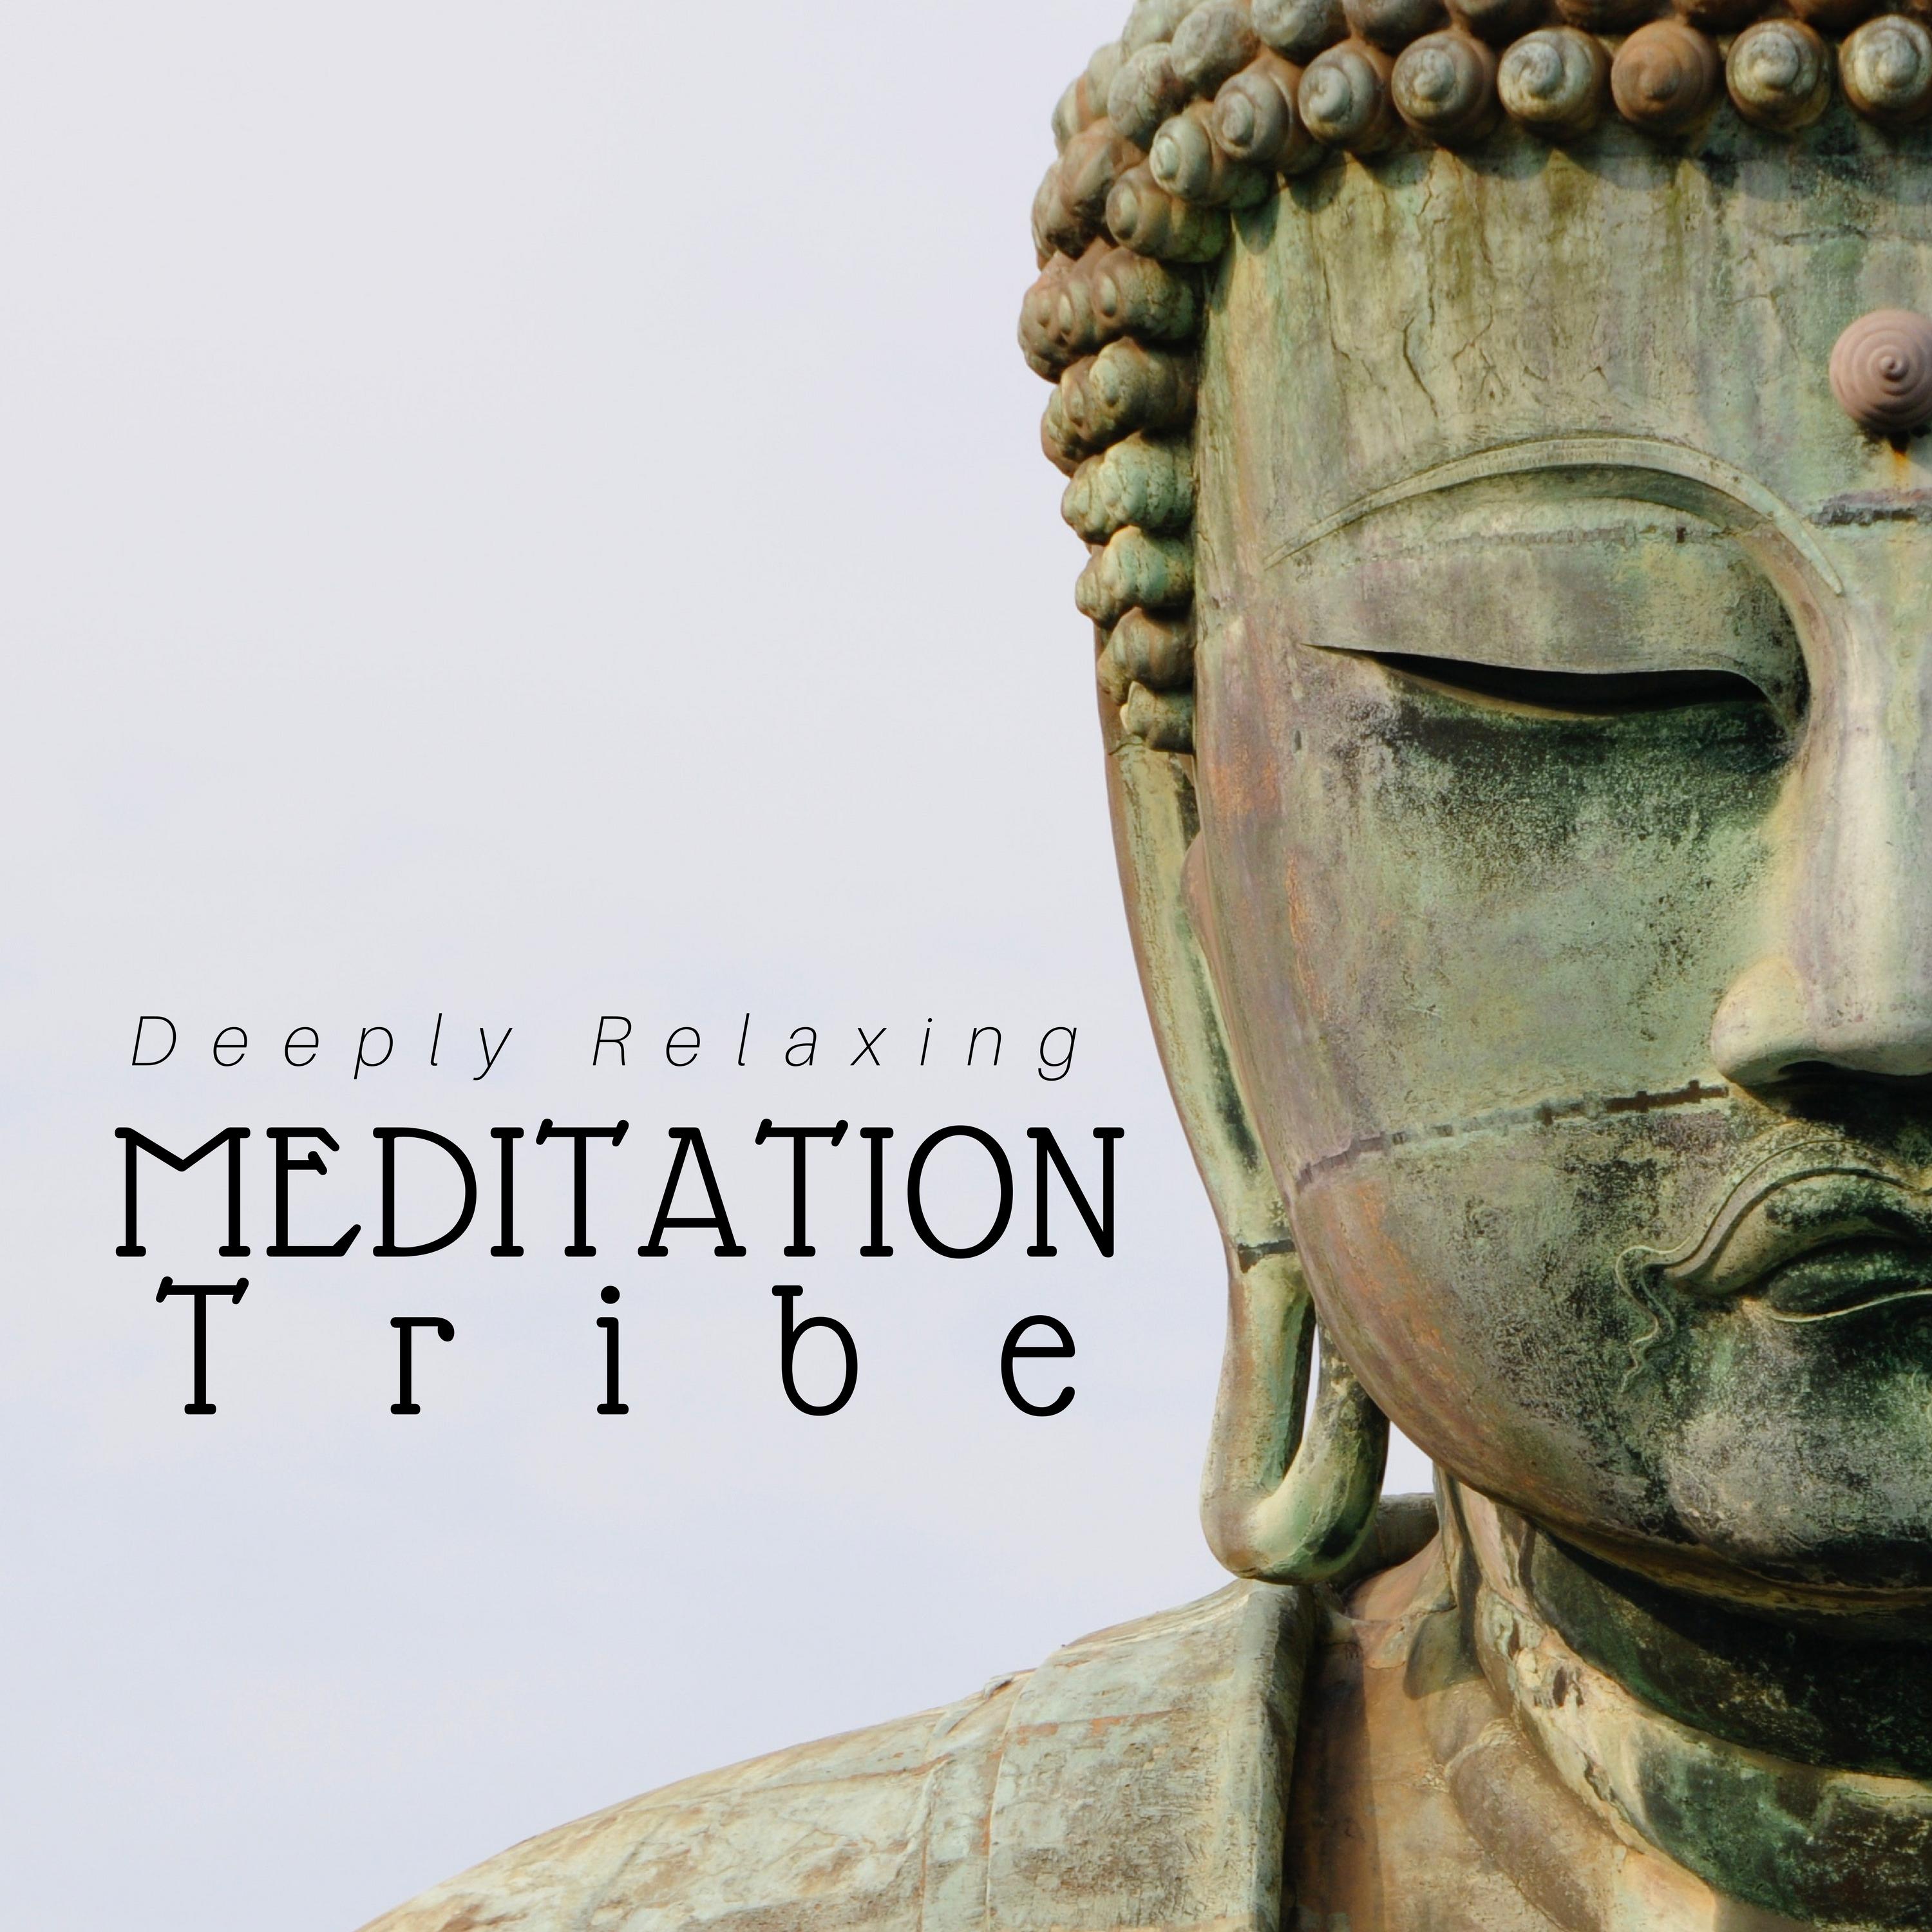 Meditation Tribe - Deeply Relaxing Yoga, Meditation Music for Energy